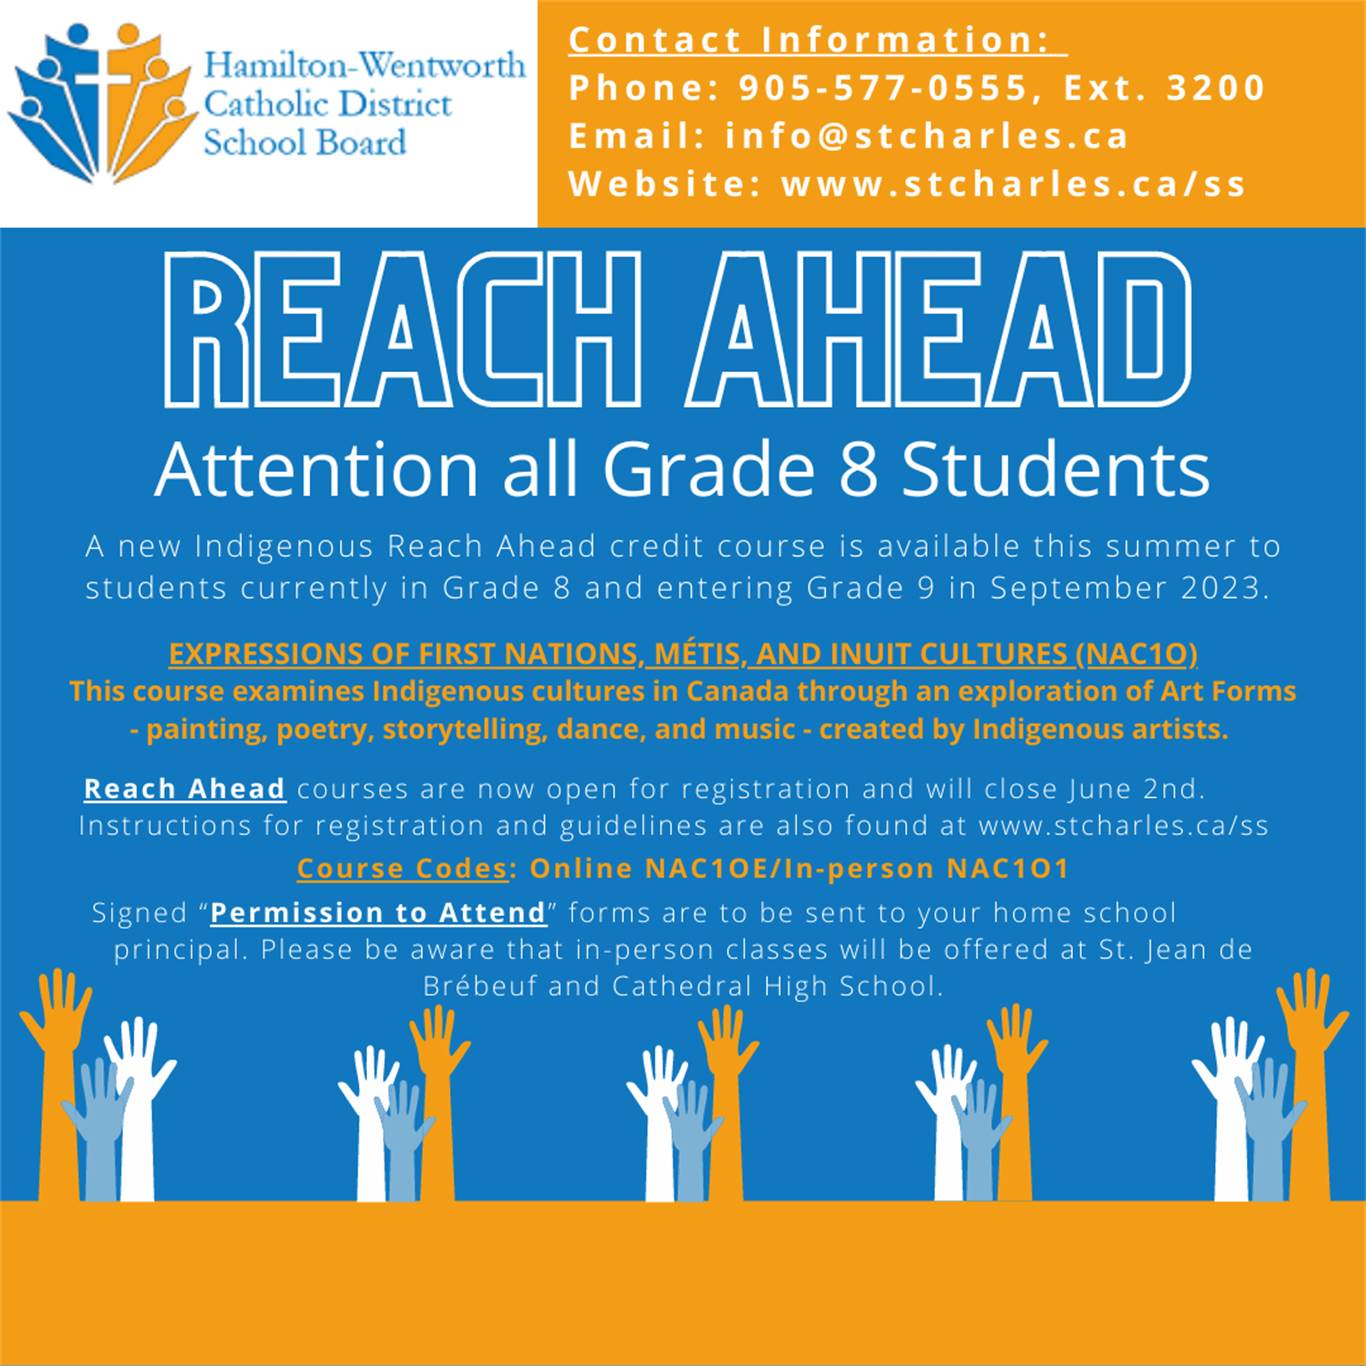 Reach Ahead credit course for Grade 8 students